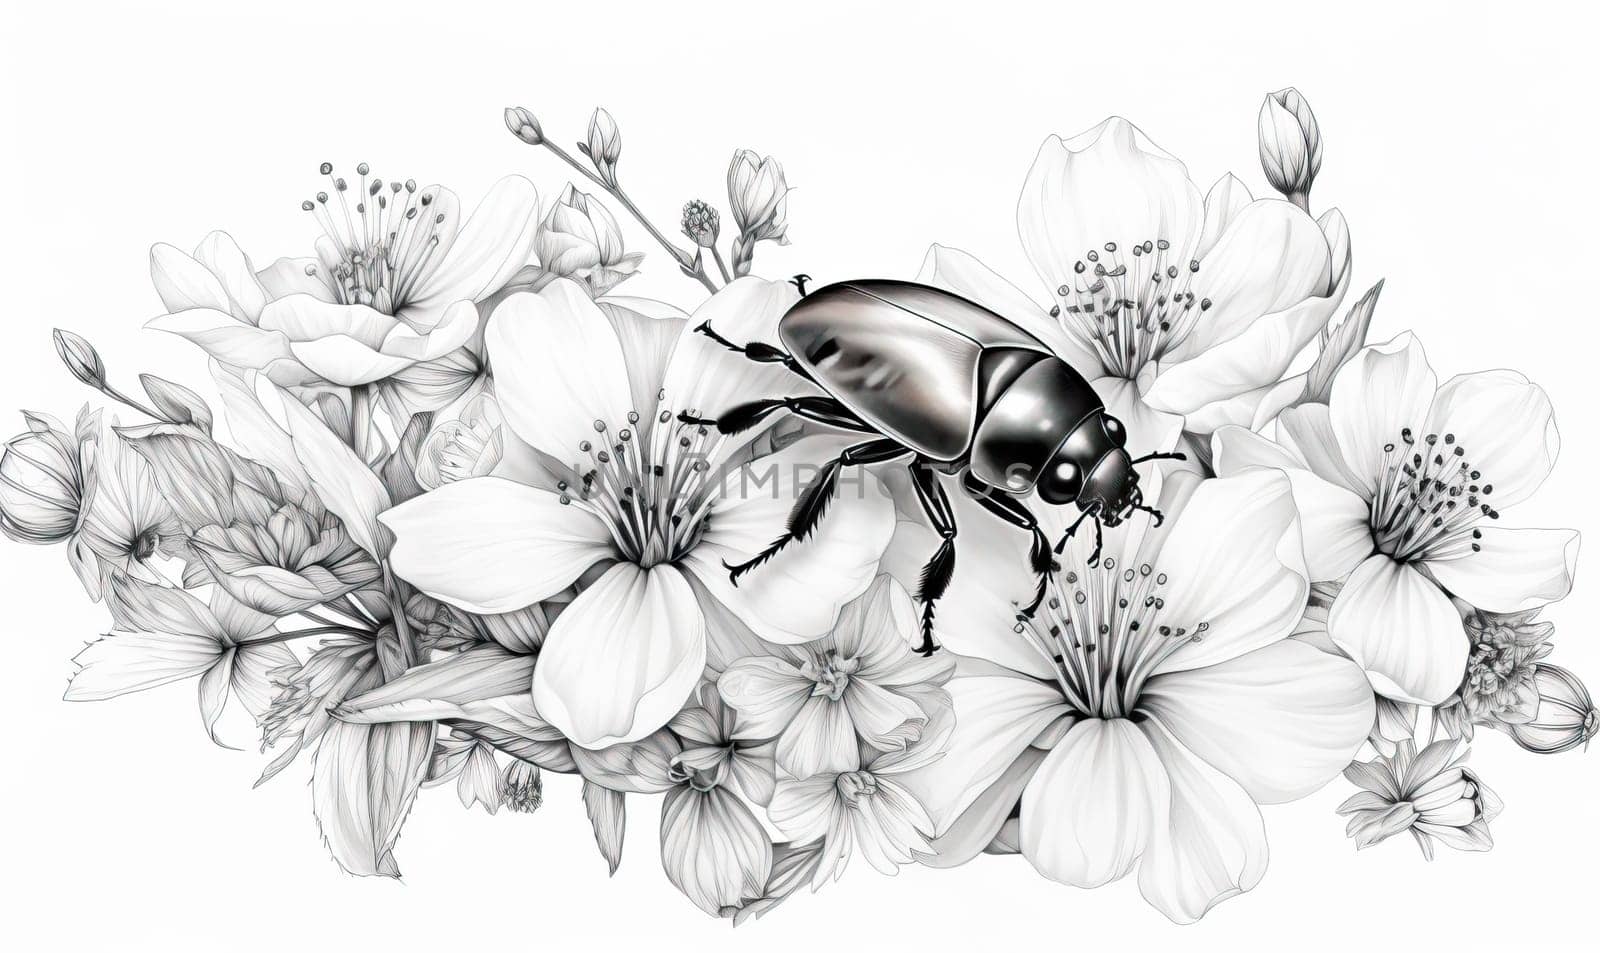 Black and white image of a beetle on flowers. by Fischeron